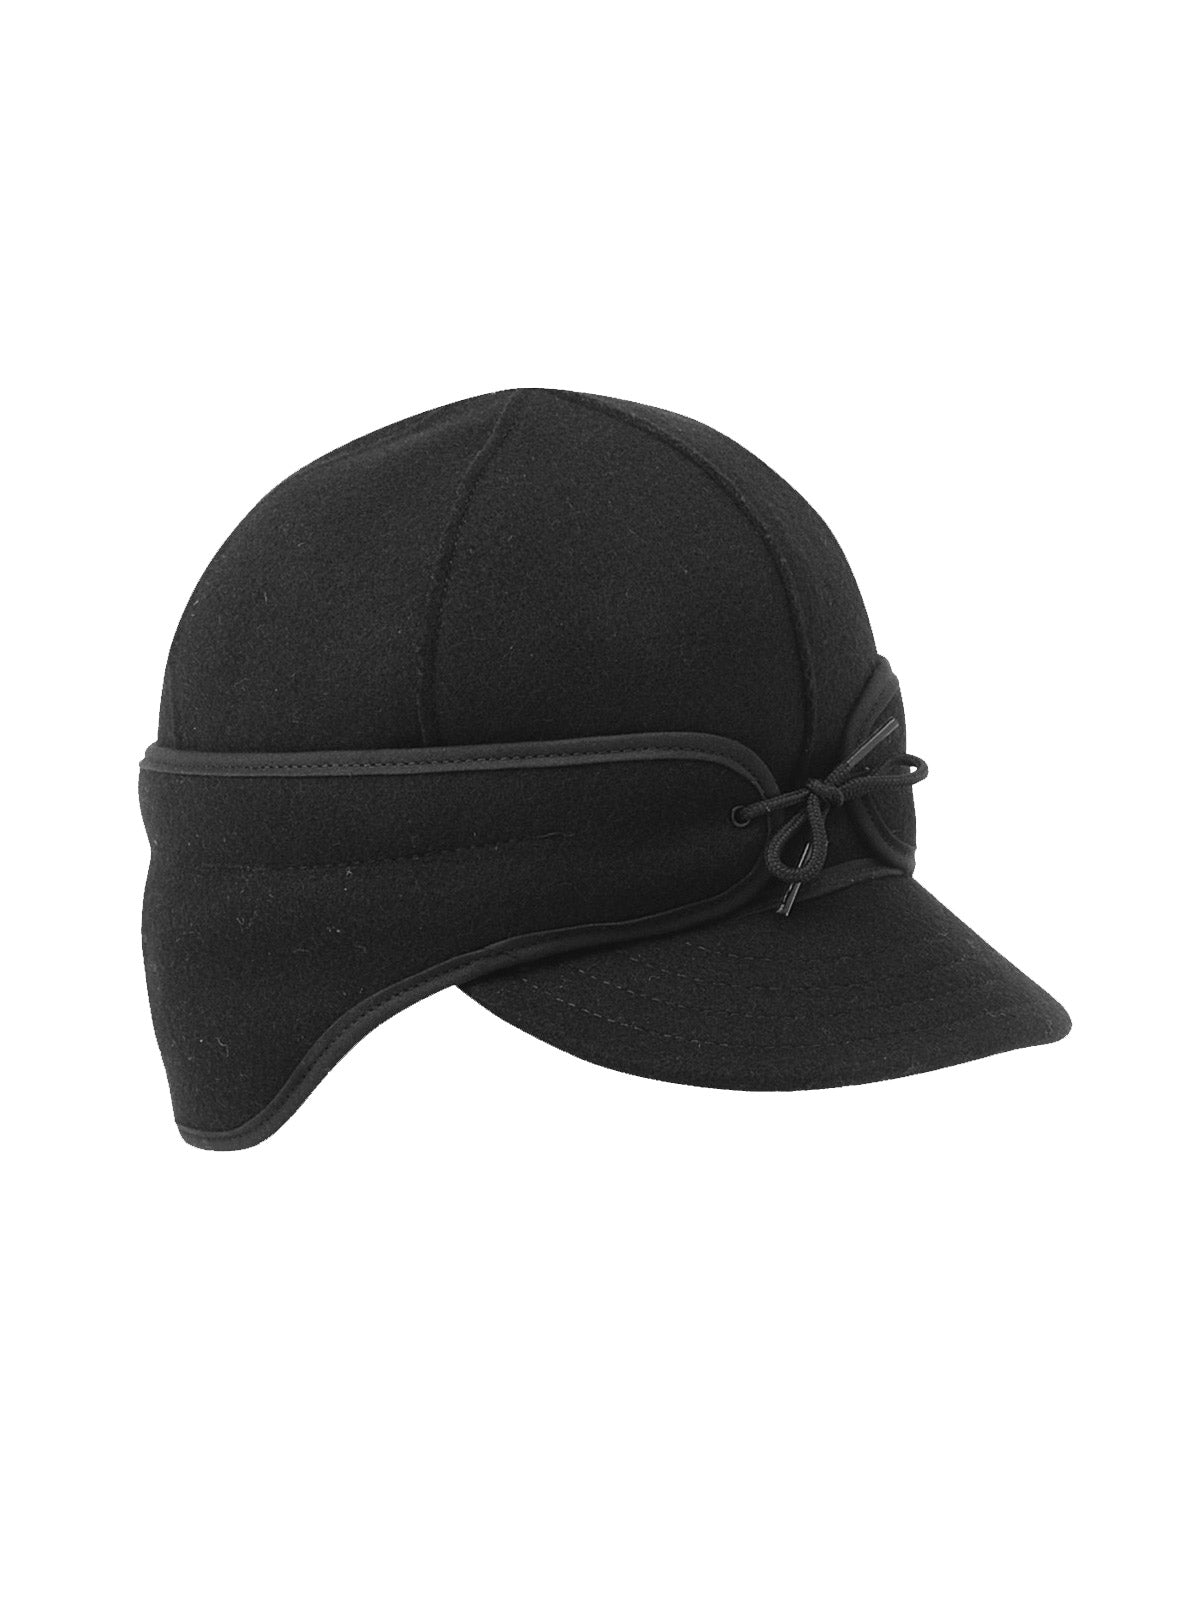 Stormy Kromer Rancher Caps With Ear Band in Black - 50500-BLK